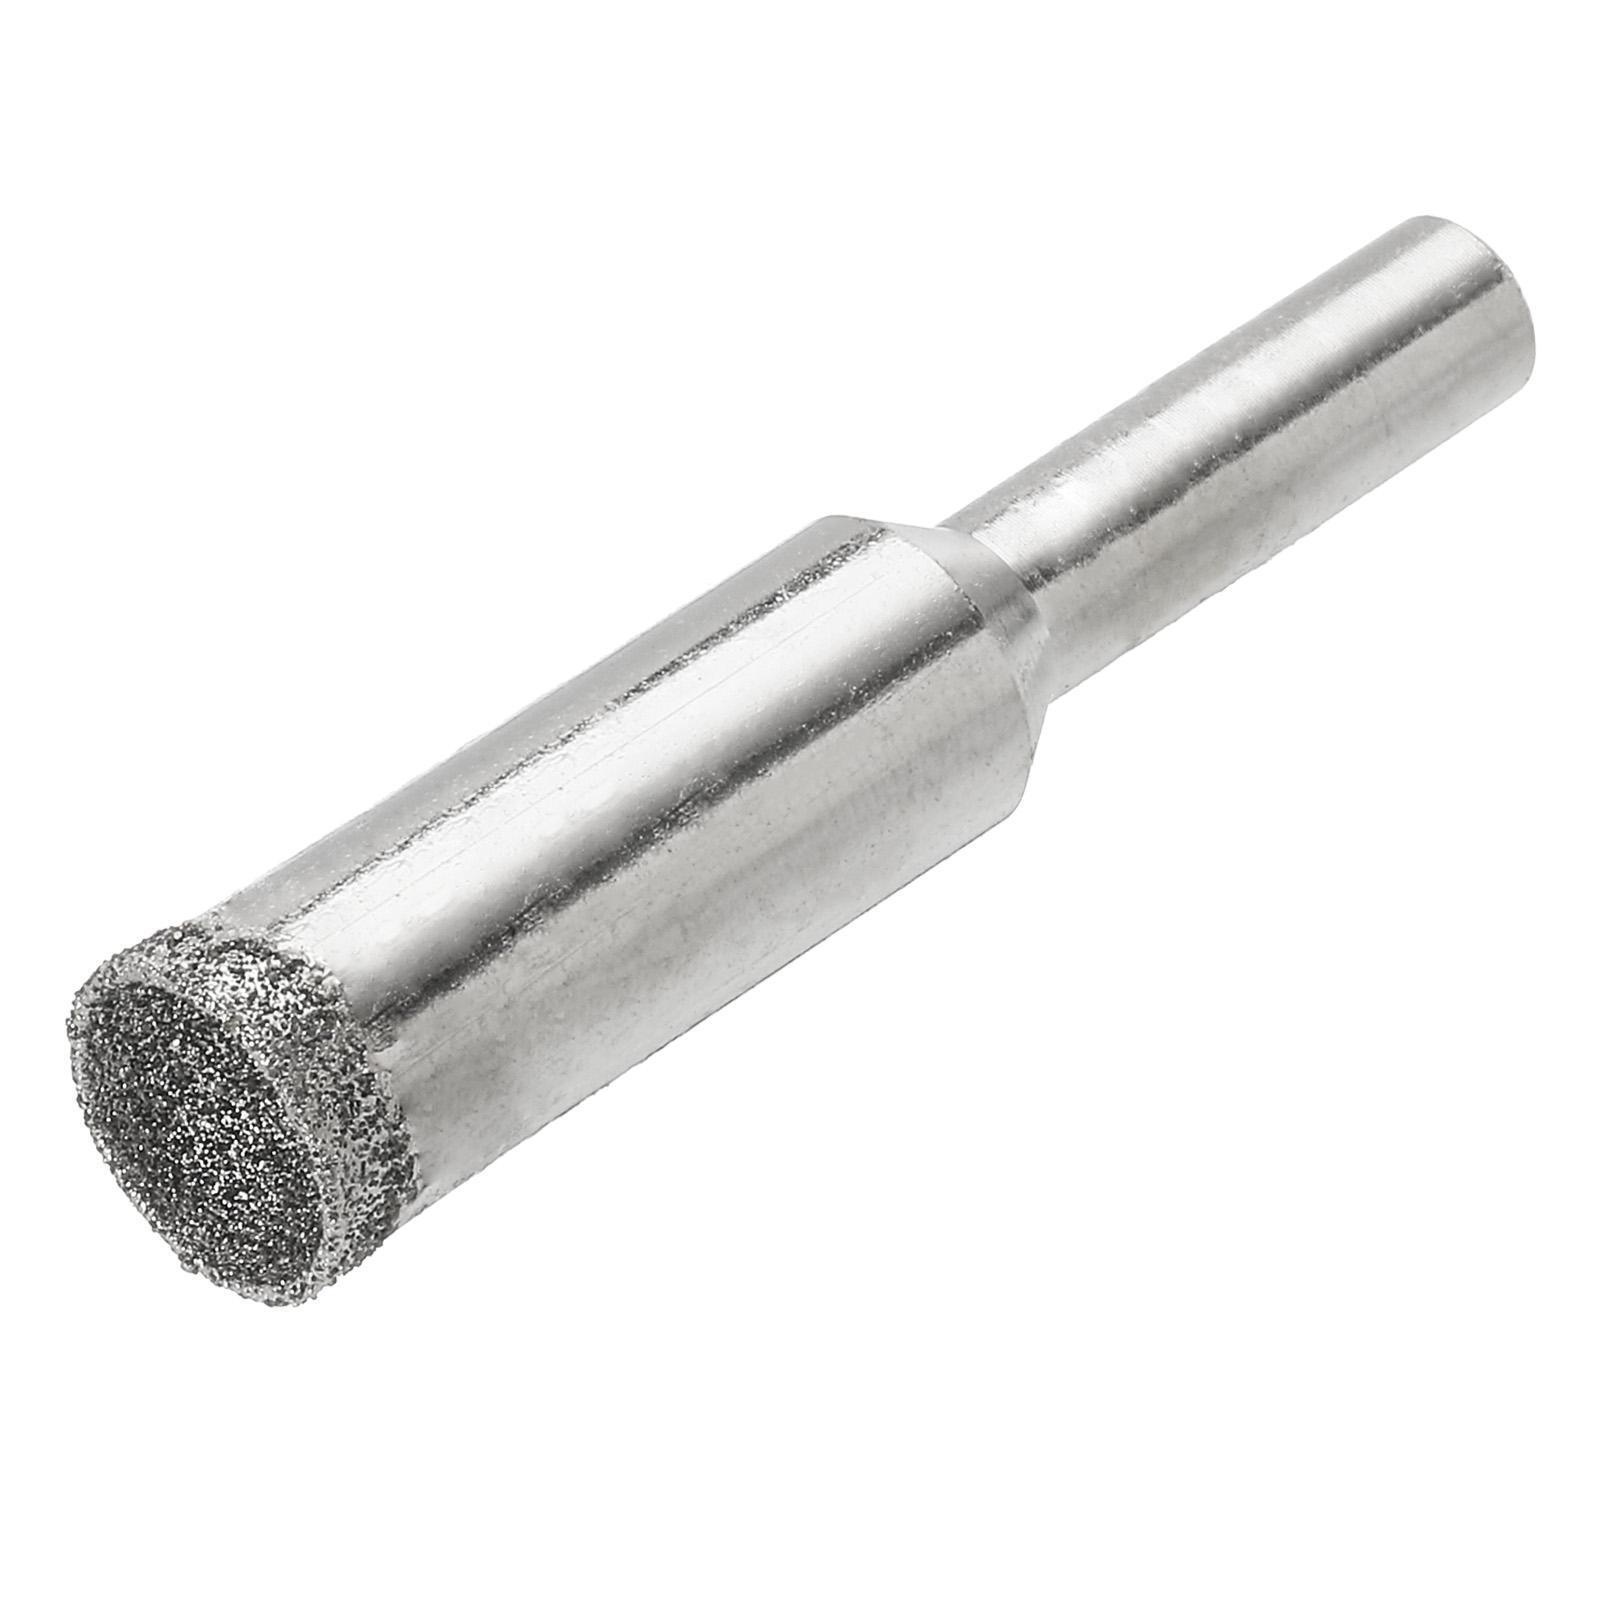 10mm 600 Grits Diamond Mounted Point Spherical Concave Head Bead Grinding Bit